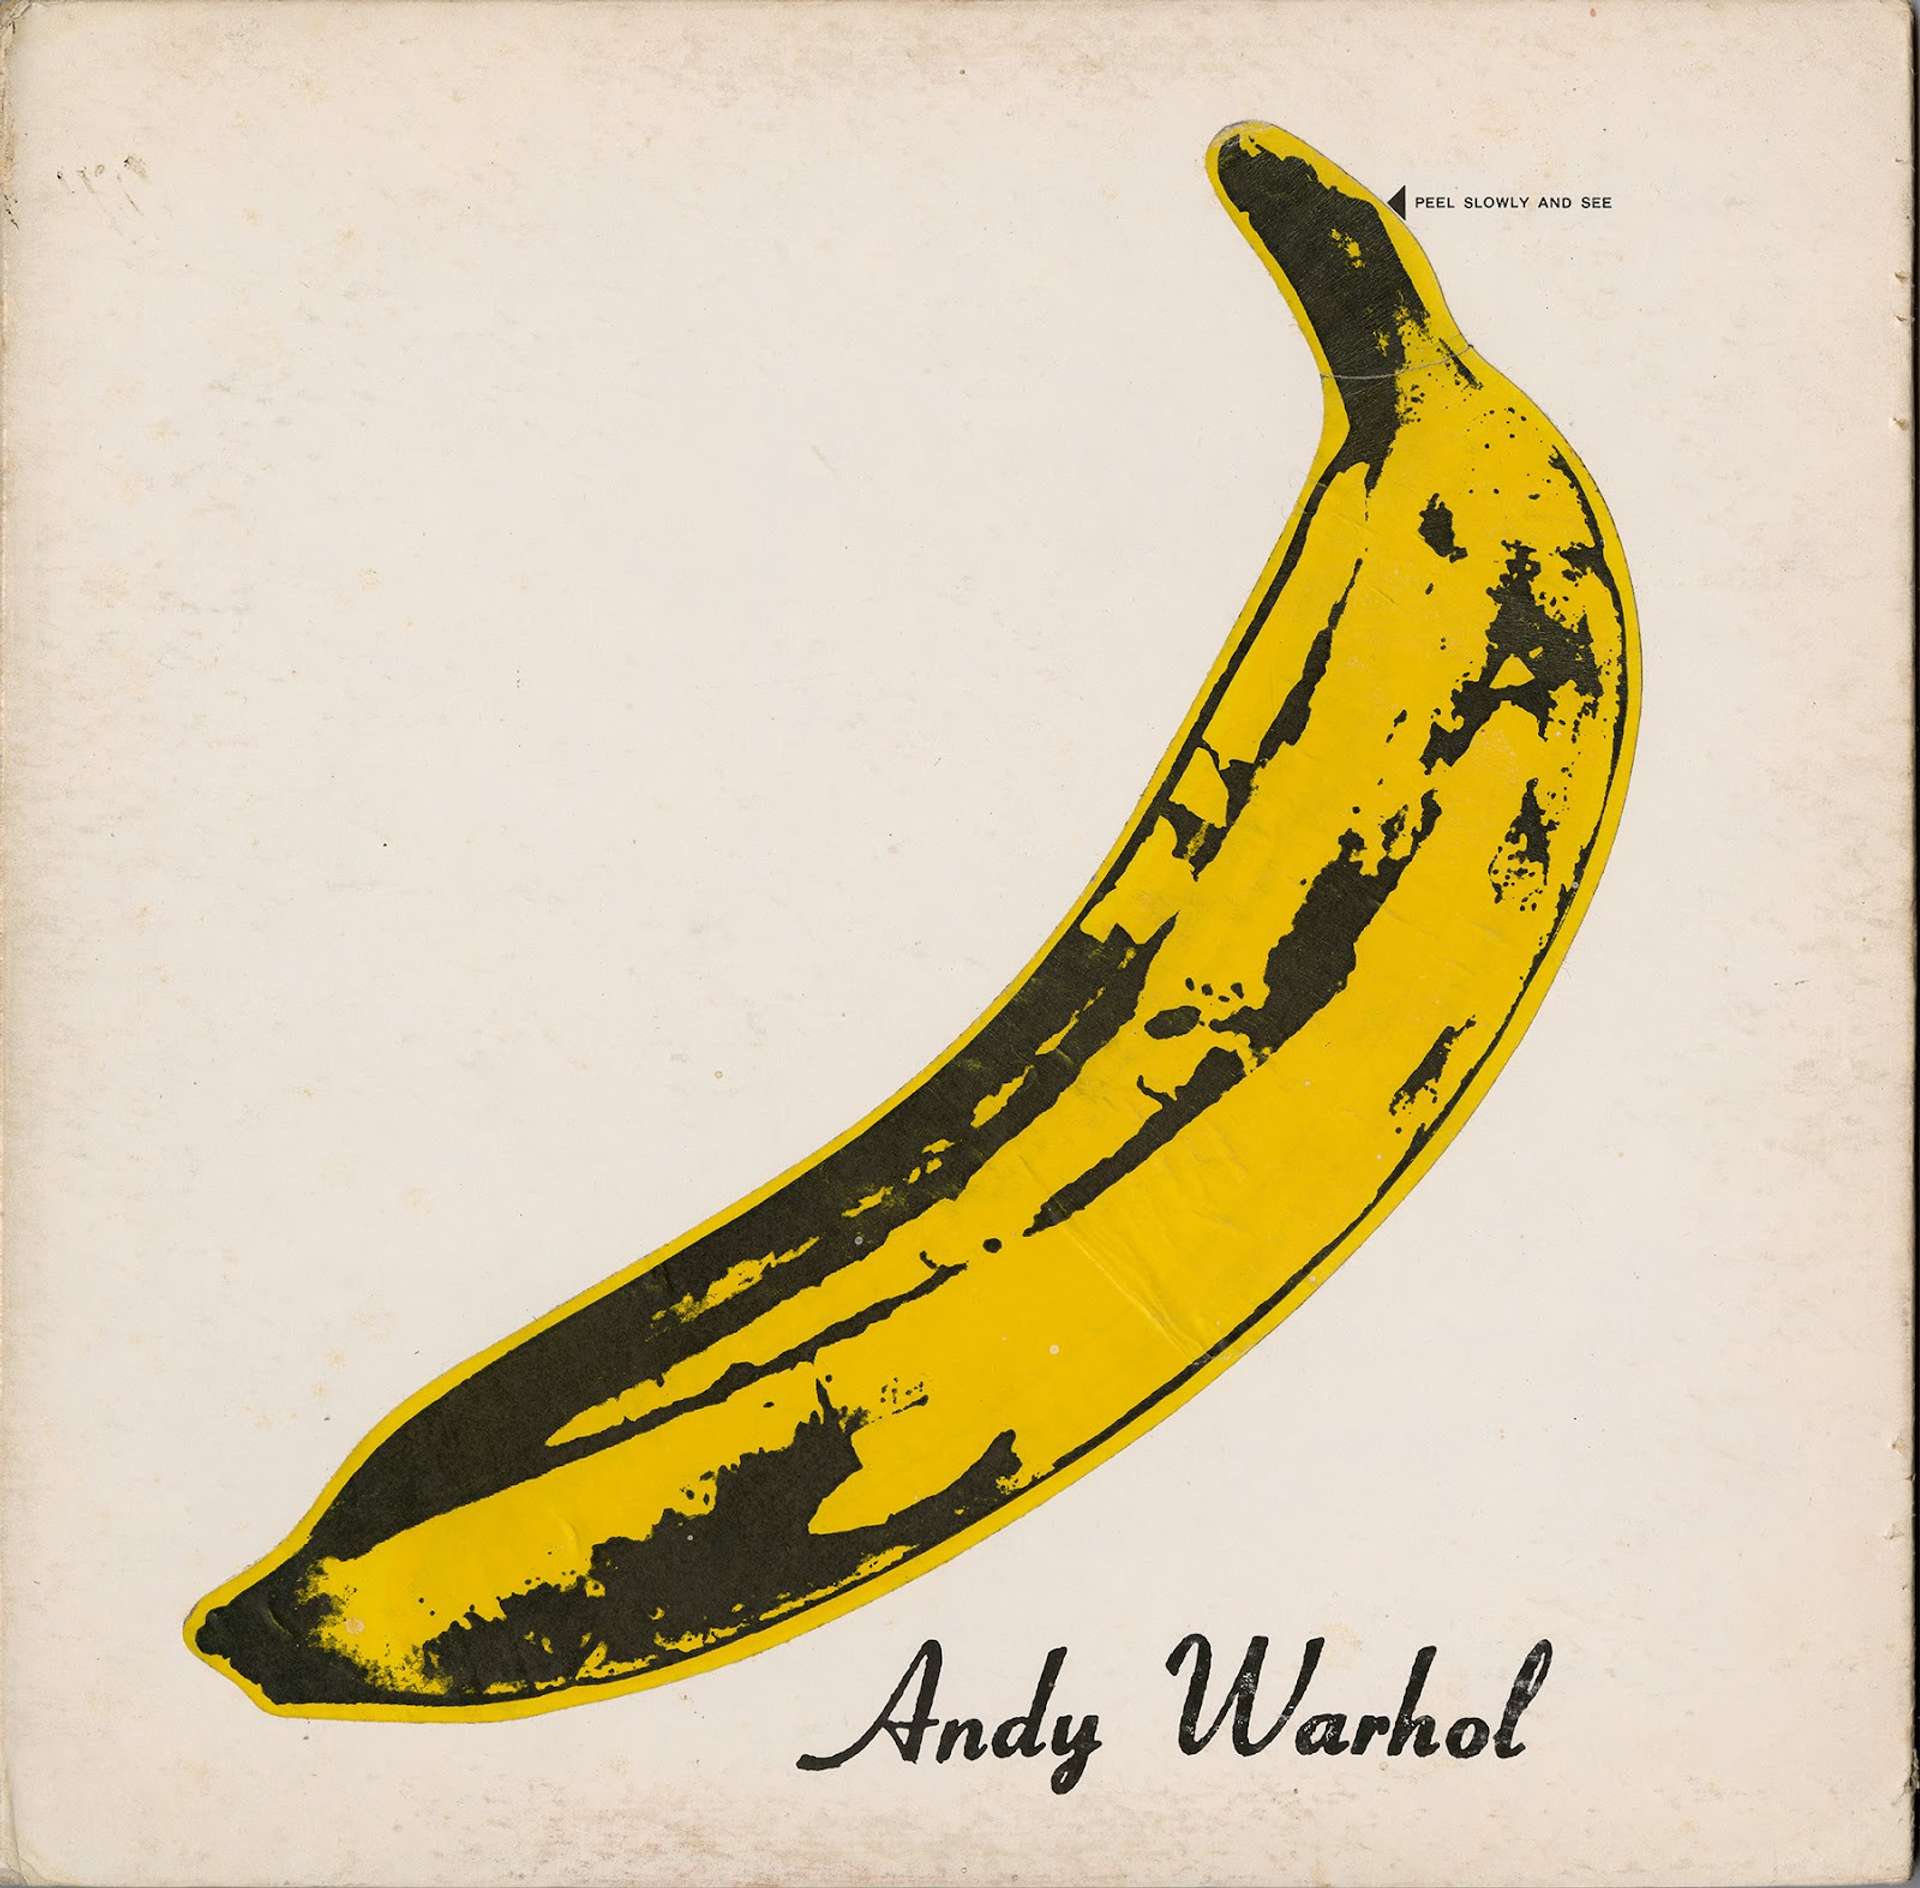 Album cover design by Andy Warhol for The Velvet Underground's 1967 album ‘The Velvet Underground & Nico’. The album cover features a screenprinted yellow banana against an off-white camera, with Andy Warhol's name written beneath the banana.